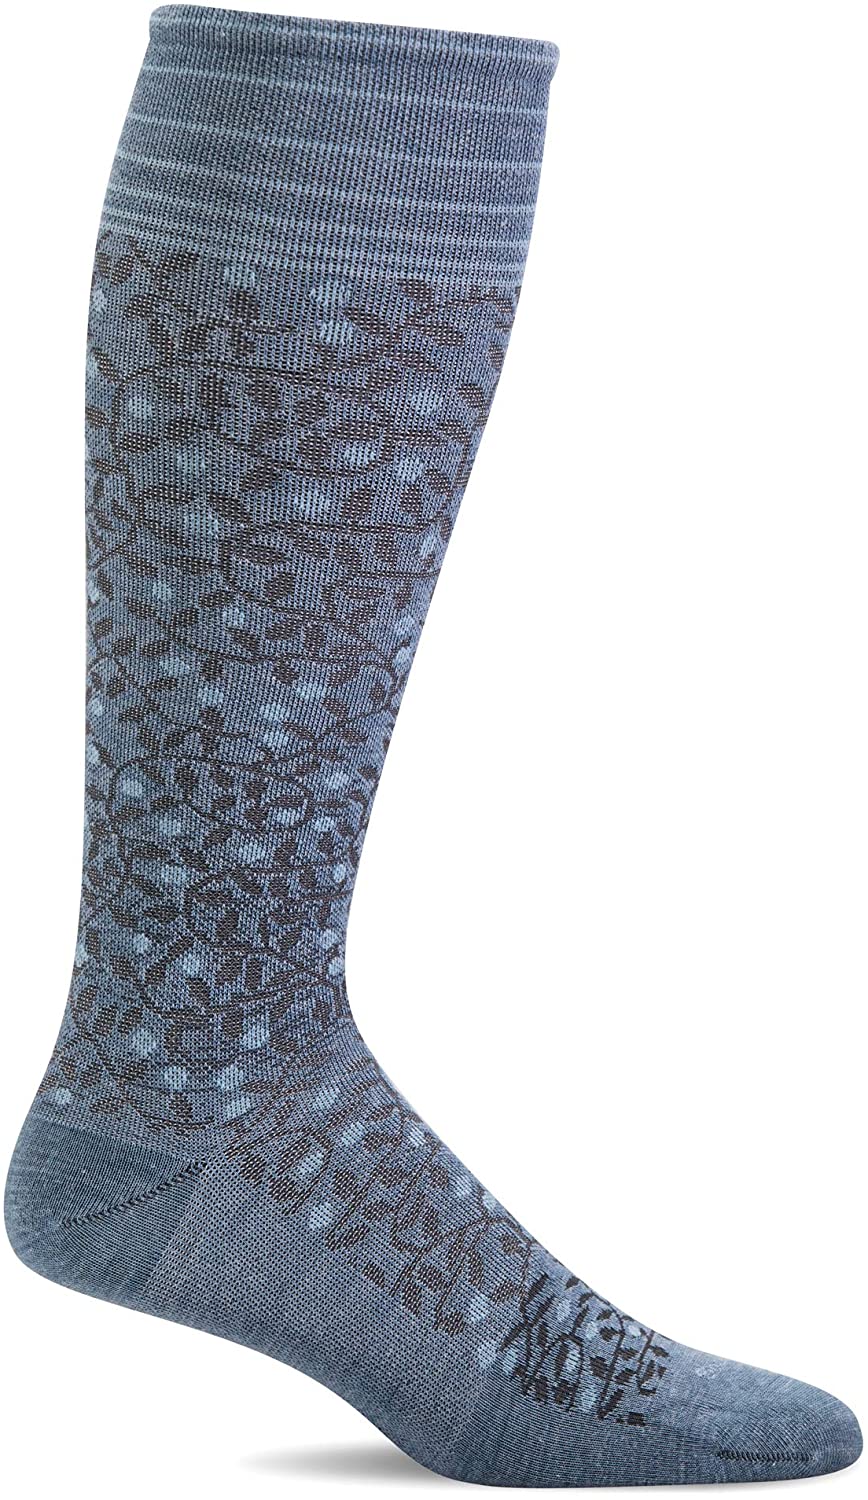 Sockwell Women's New Leaf Firm Graduated Compression Sock in Bluestone from the side